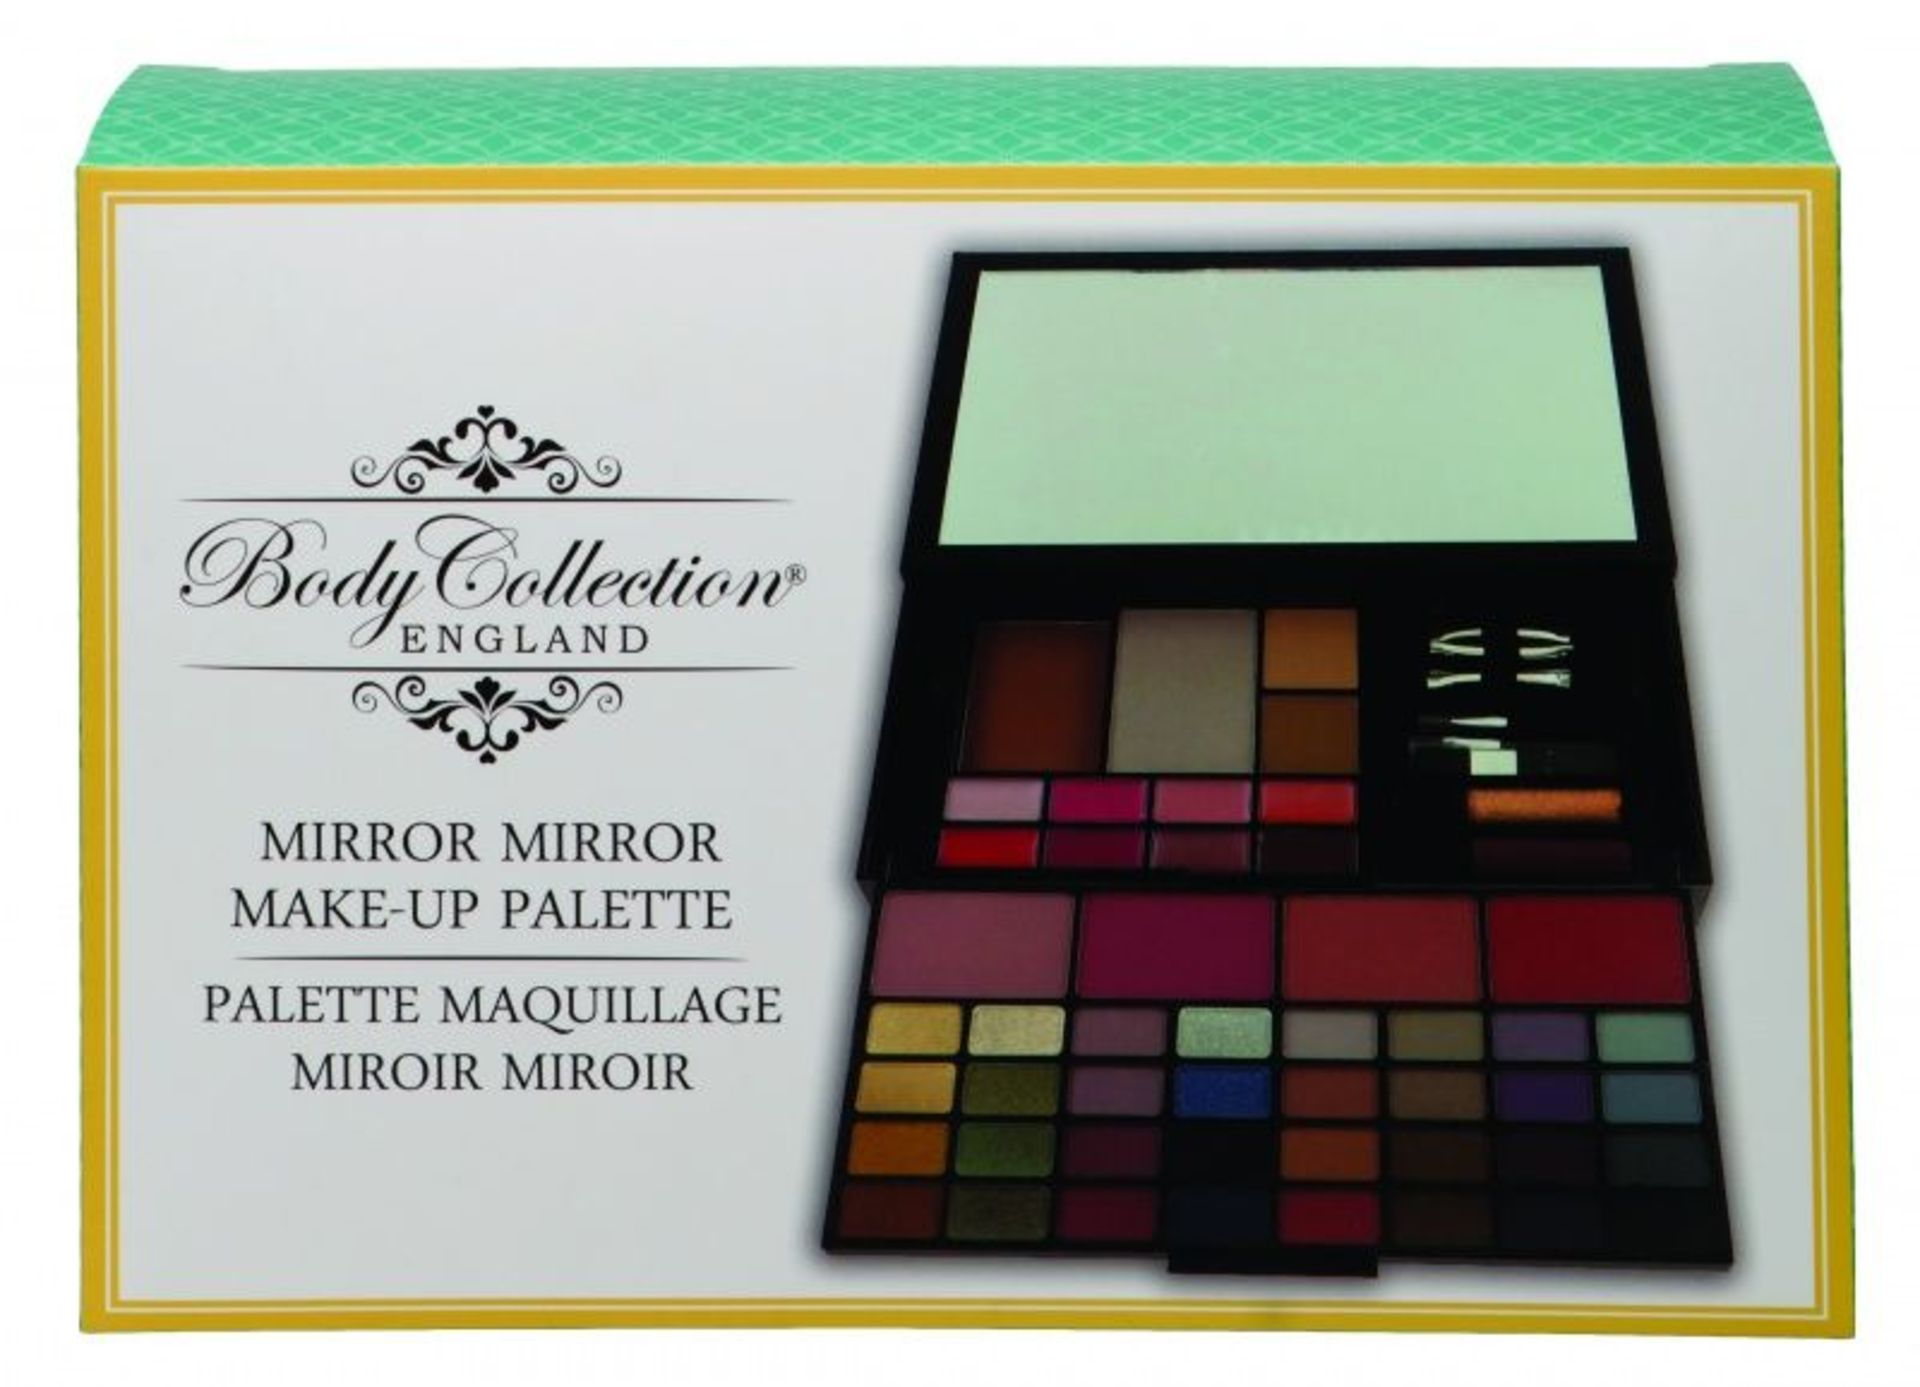 V Brand New Body Collection Mirror Mirror Make Up Palette ISP £19.95 (Beauty Base)